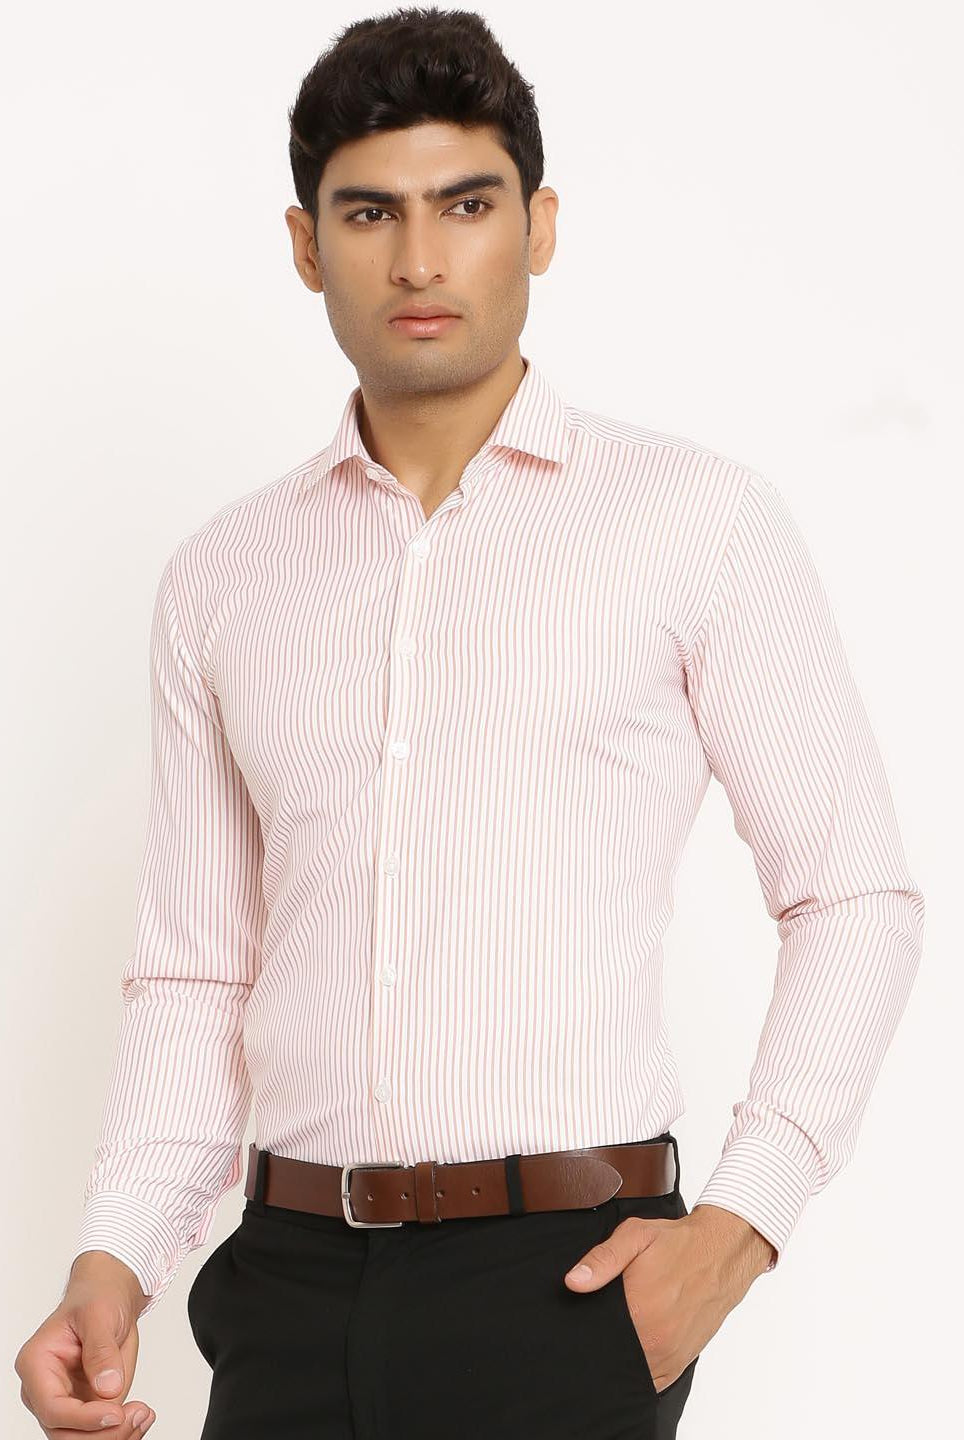 Peach and white wide stripes shirt - Tistabene